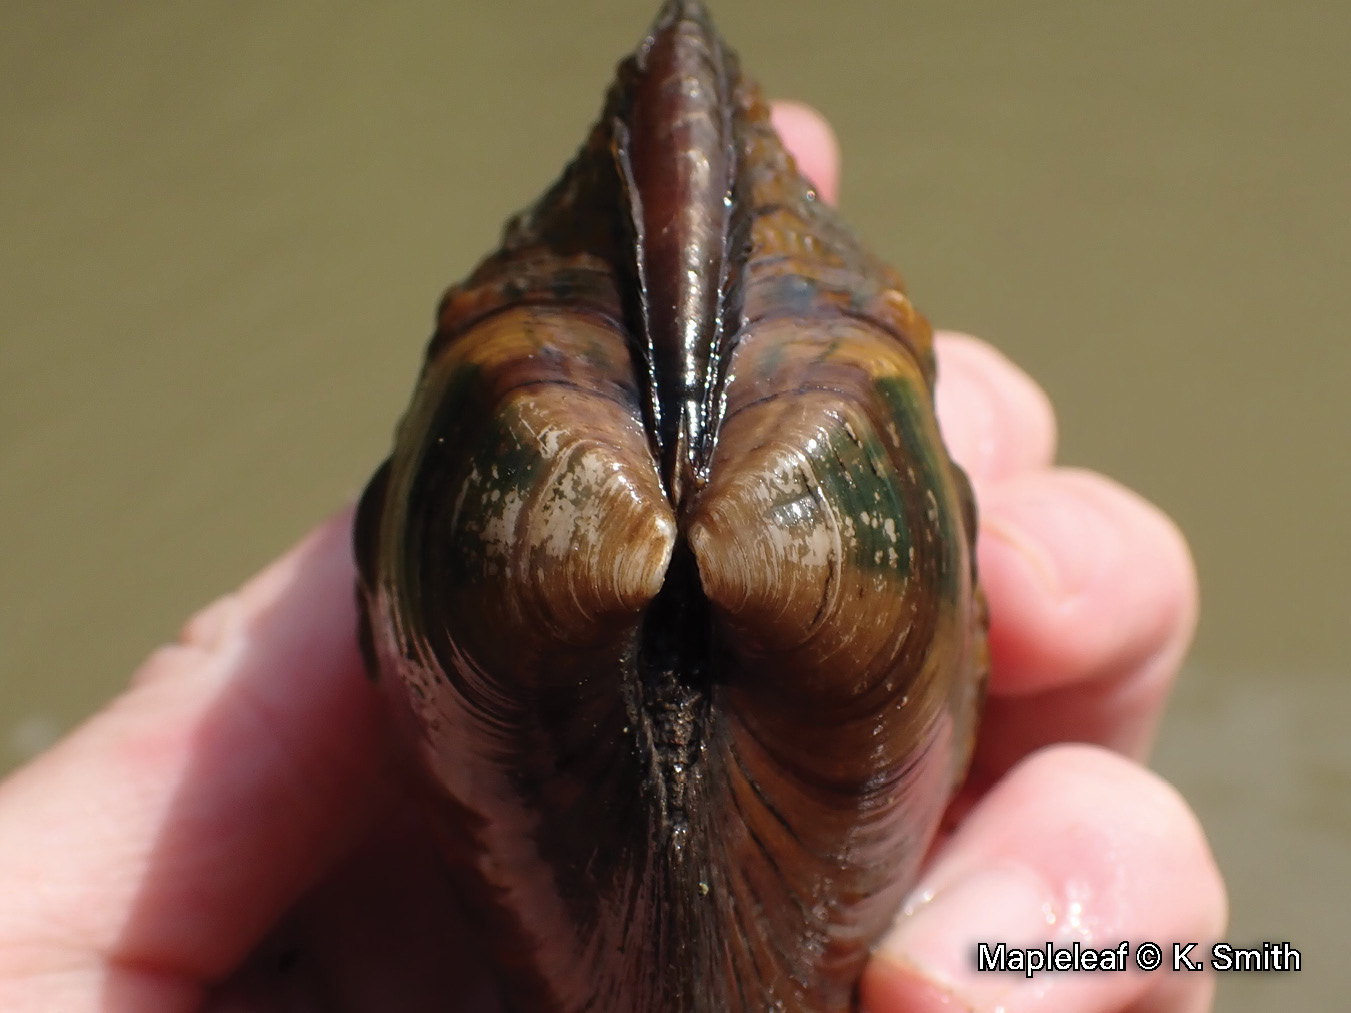 Picture of the beak of a Pimpleback mussel in a hand, a brown, medium-sized mussel that has indistinct ridges and a broad green ray on its beak